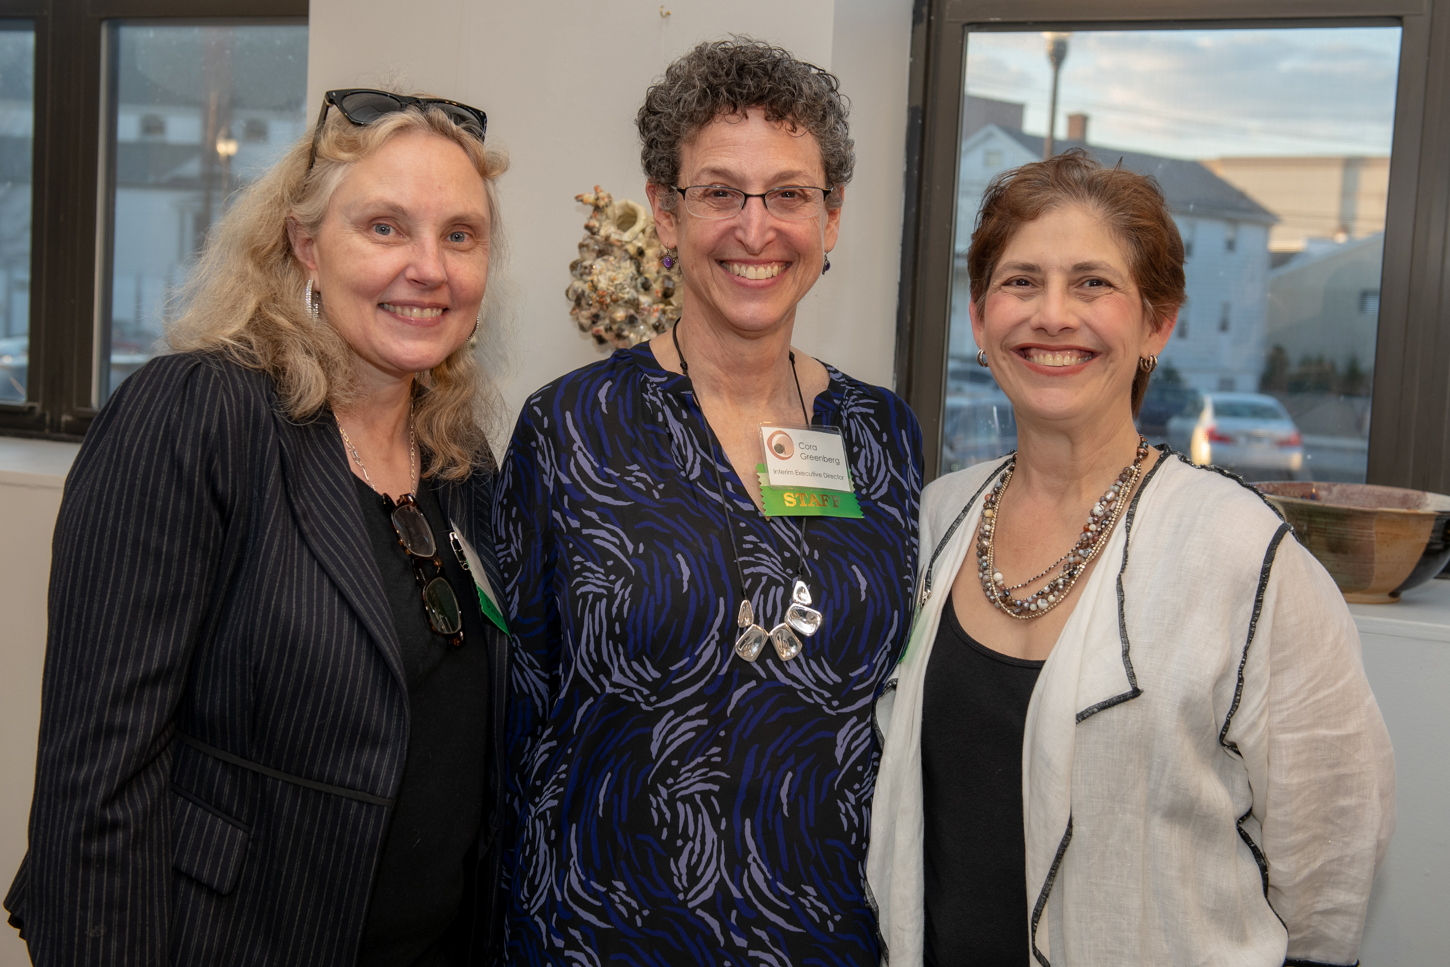  Nancy Yates, CAC Communications Manager, Cora Greenberg, CAC Interim Executive Director, Wendy Weinstein, CAC Development Manager 